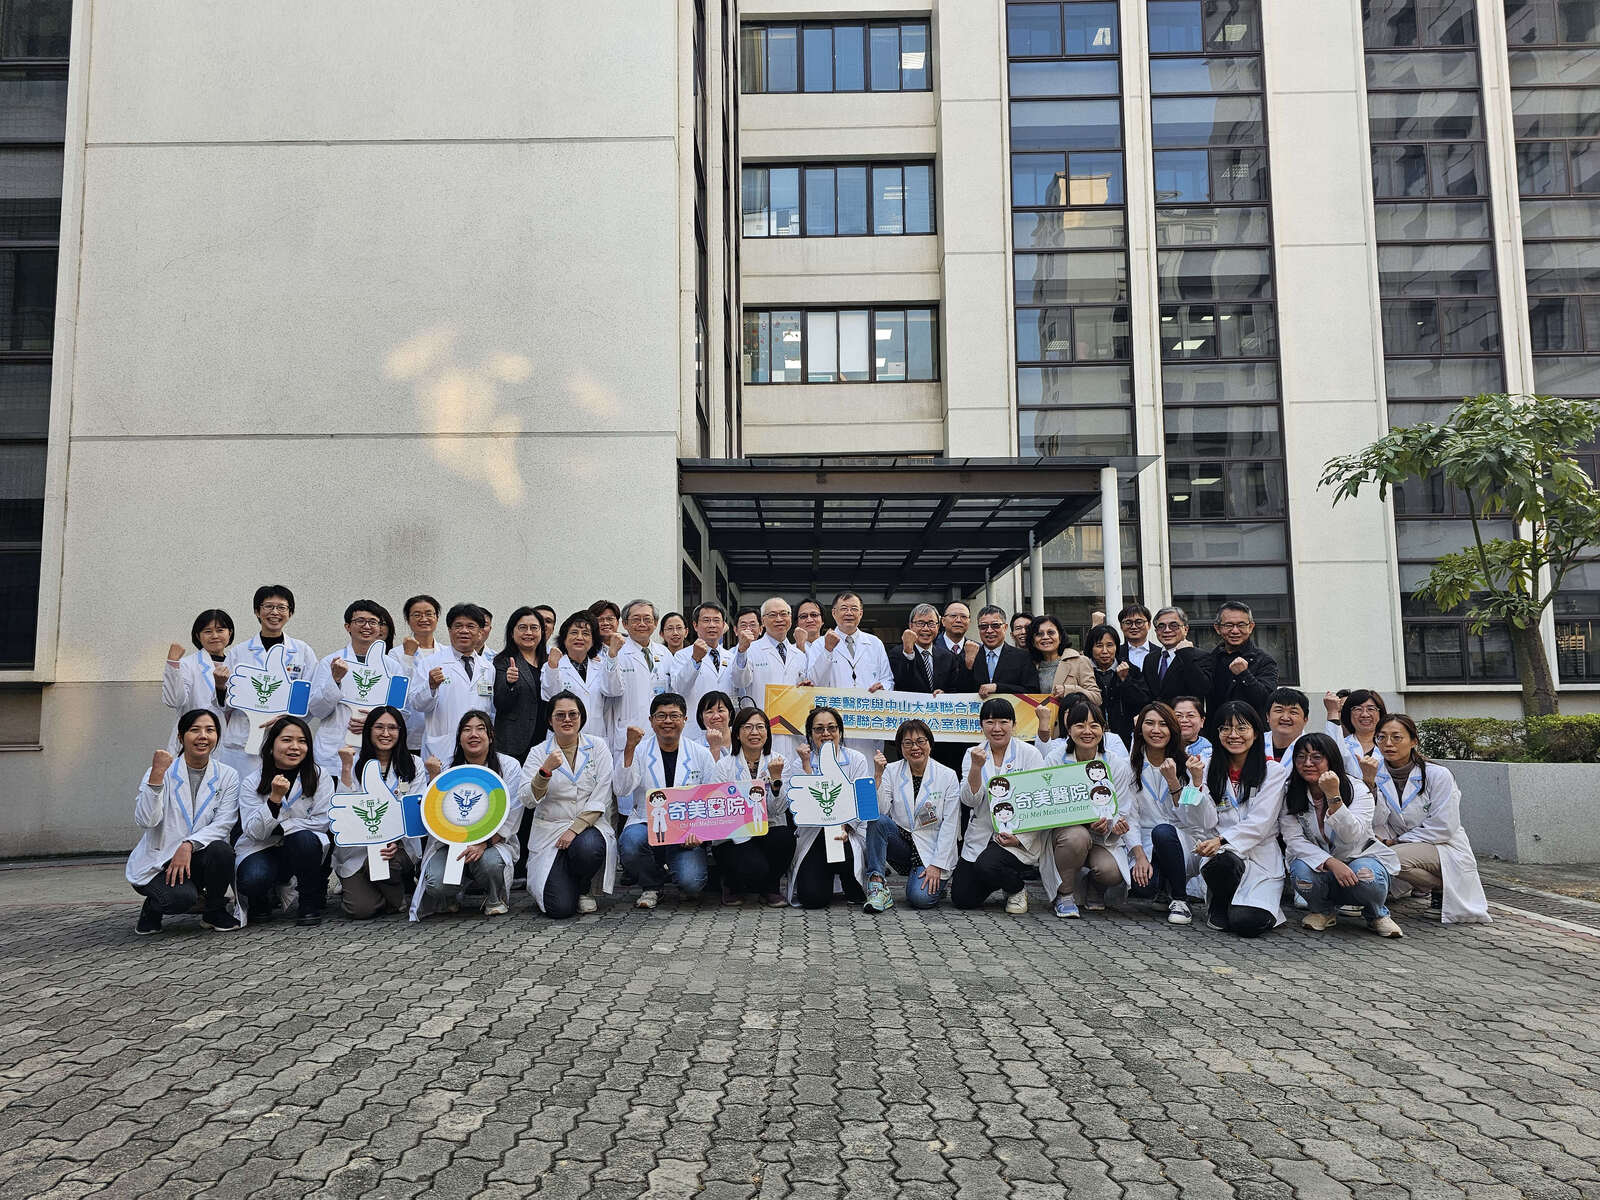 The alliance between National Sun Yat-sen University (NSYSU) and Chi Mei Medical Center (CMMC) has taken another step forward. The two sides officially unveiled the "Joint Core Lab on Precision Medicine," "Joint Lab on Circulatory Medicine," and "Joint Education Office" at CMMC.